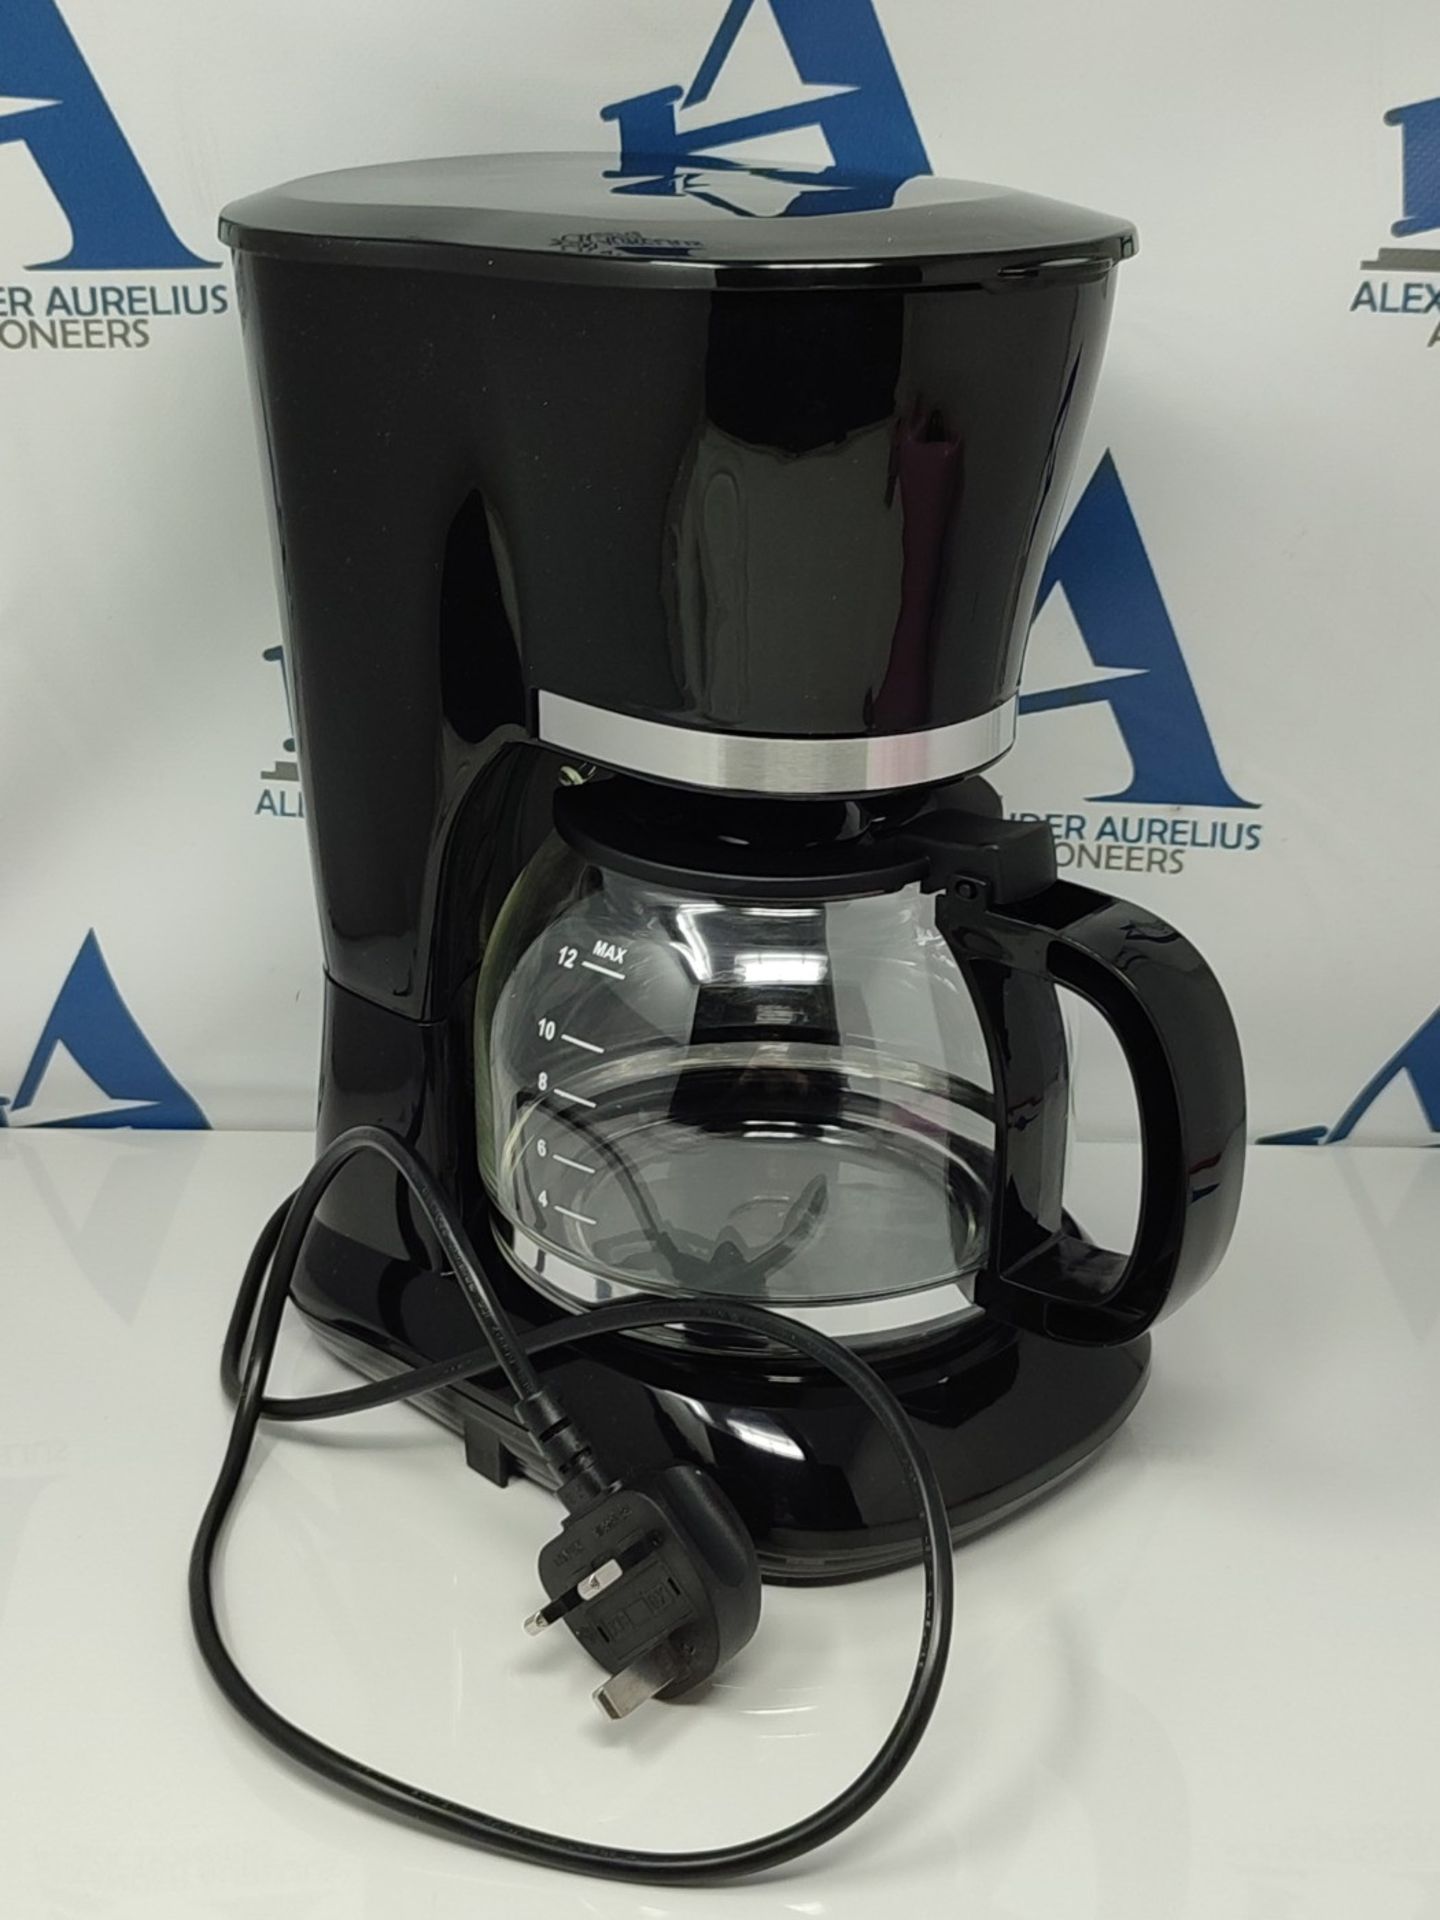 GEEPAS 1.5L Filter Coffee Machine | 800W Coffee Maker for Instant Coffee, Espresso, Ma - Image 3 of 3